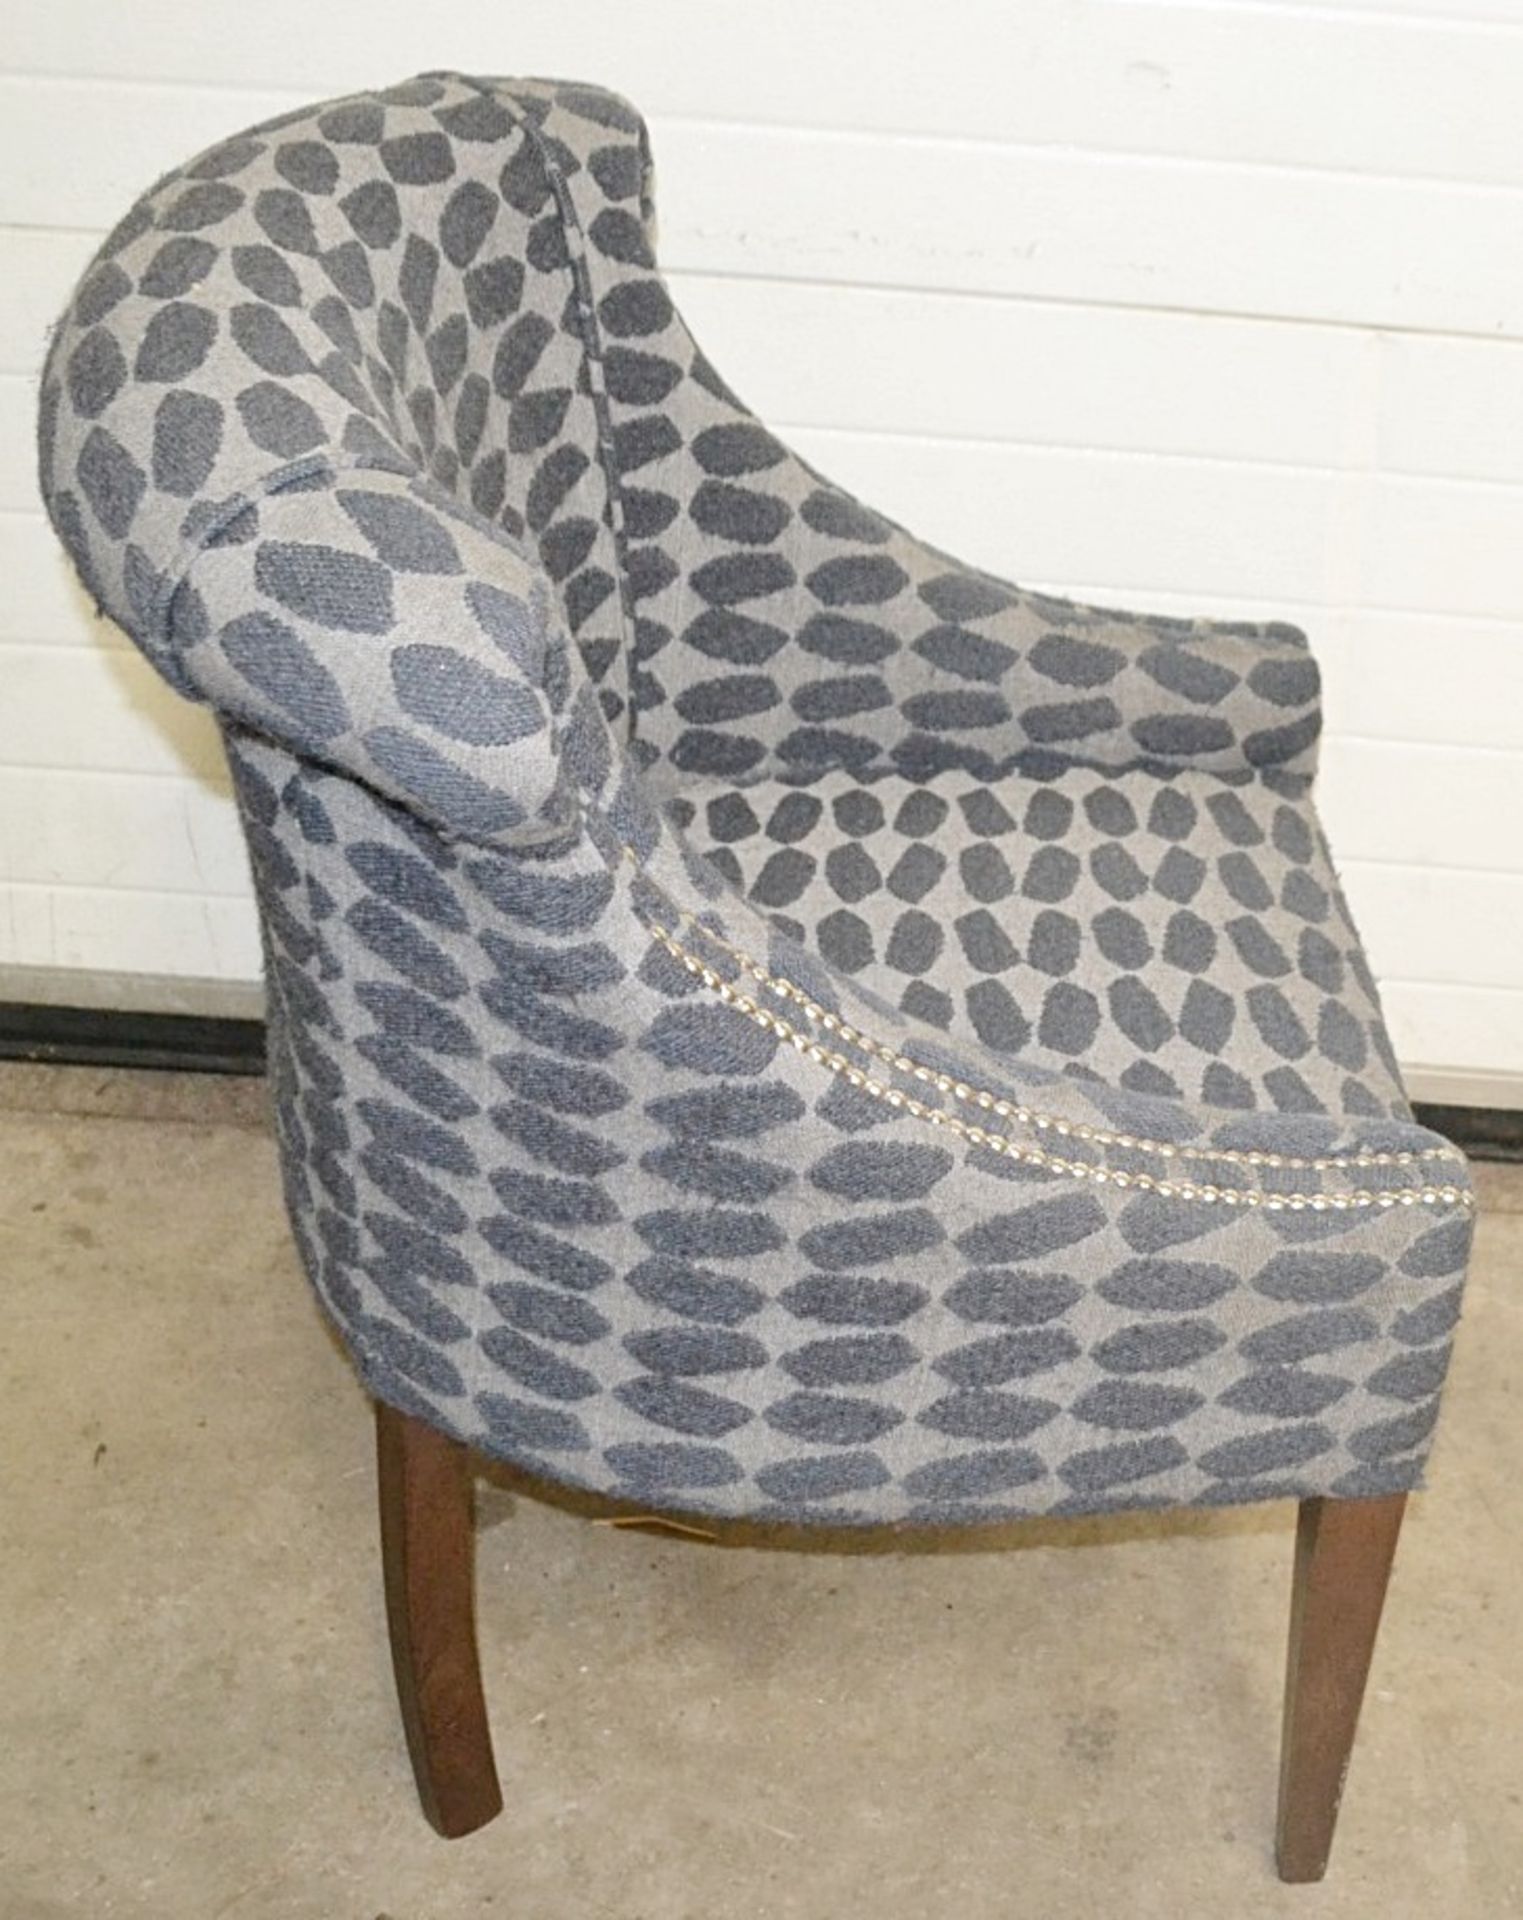 3 x Blue & Grey Upholstered Bar Chairs For Commercial Use - Dimensions (cm): W70 x D60, Back - Image 2 of 7